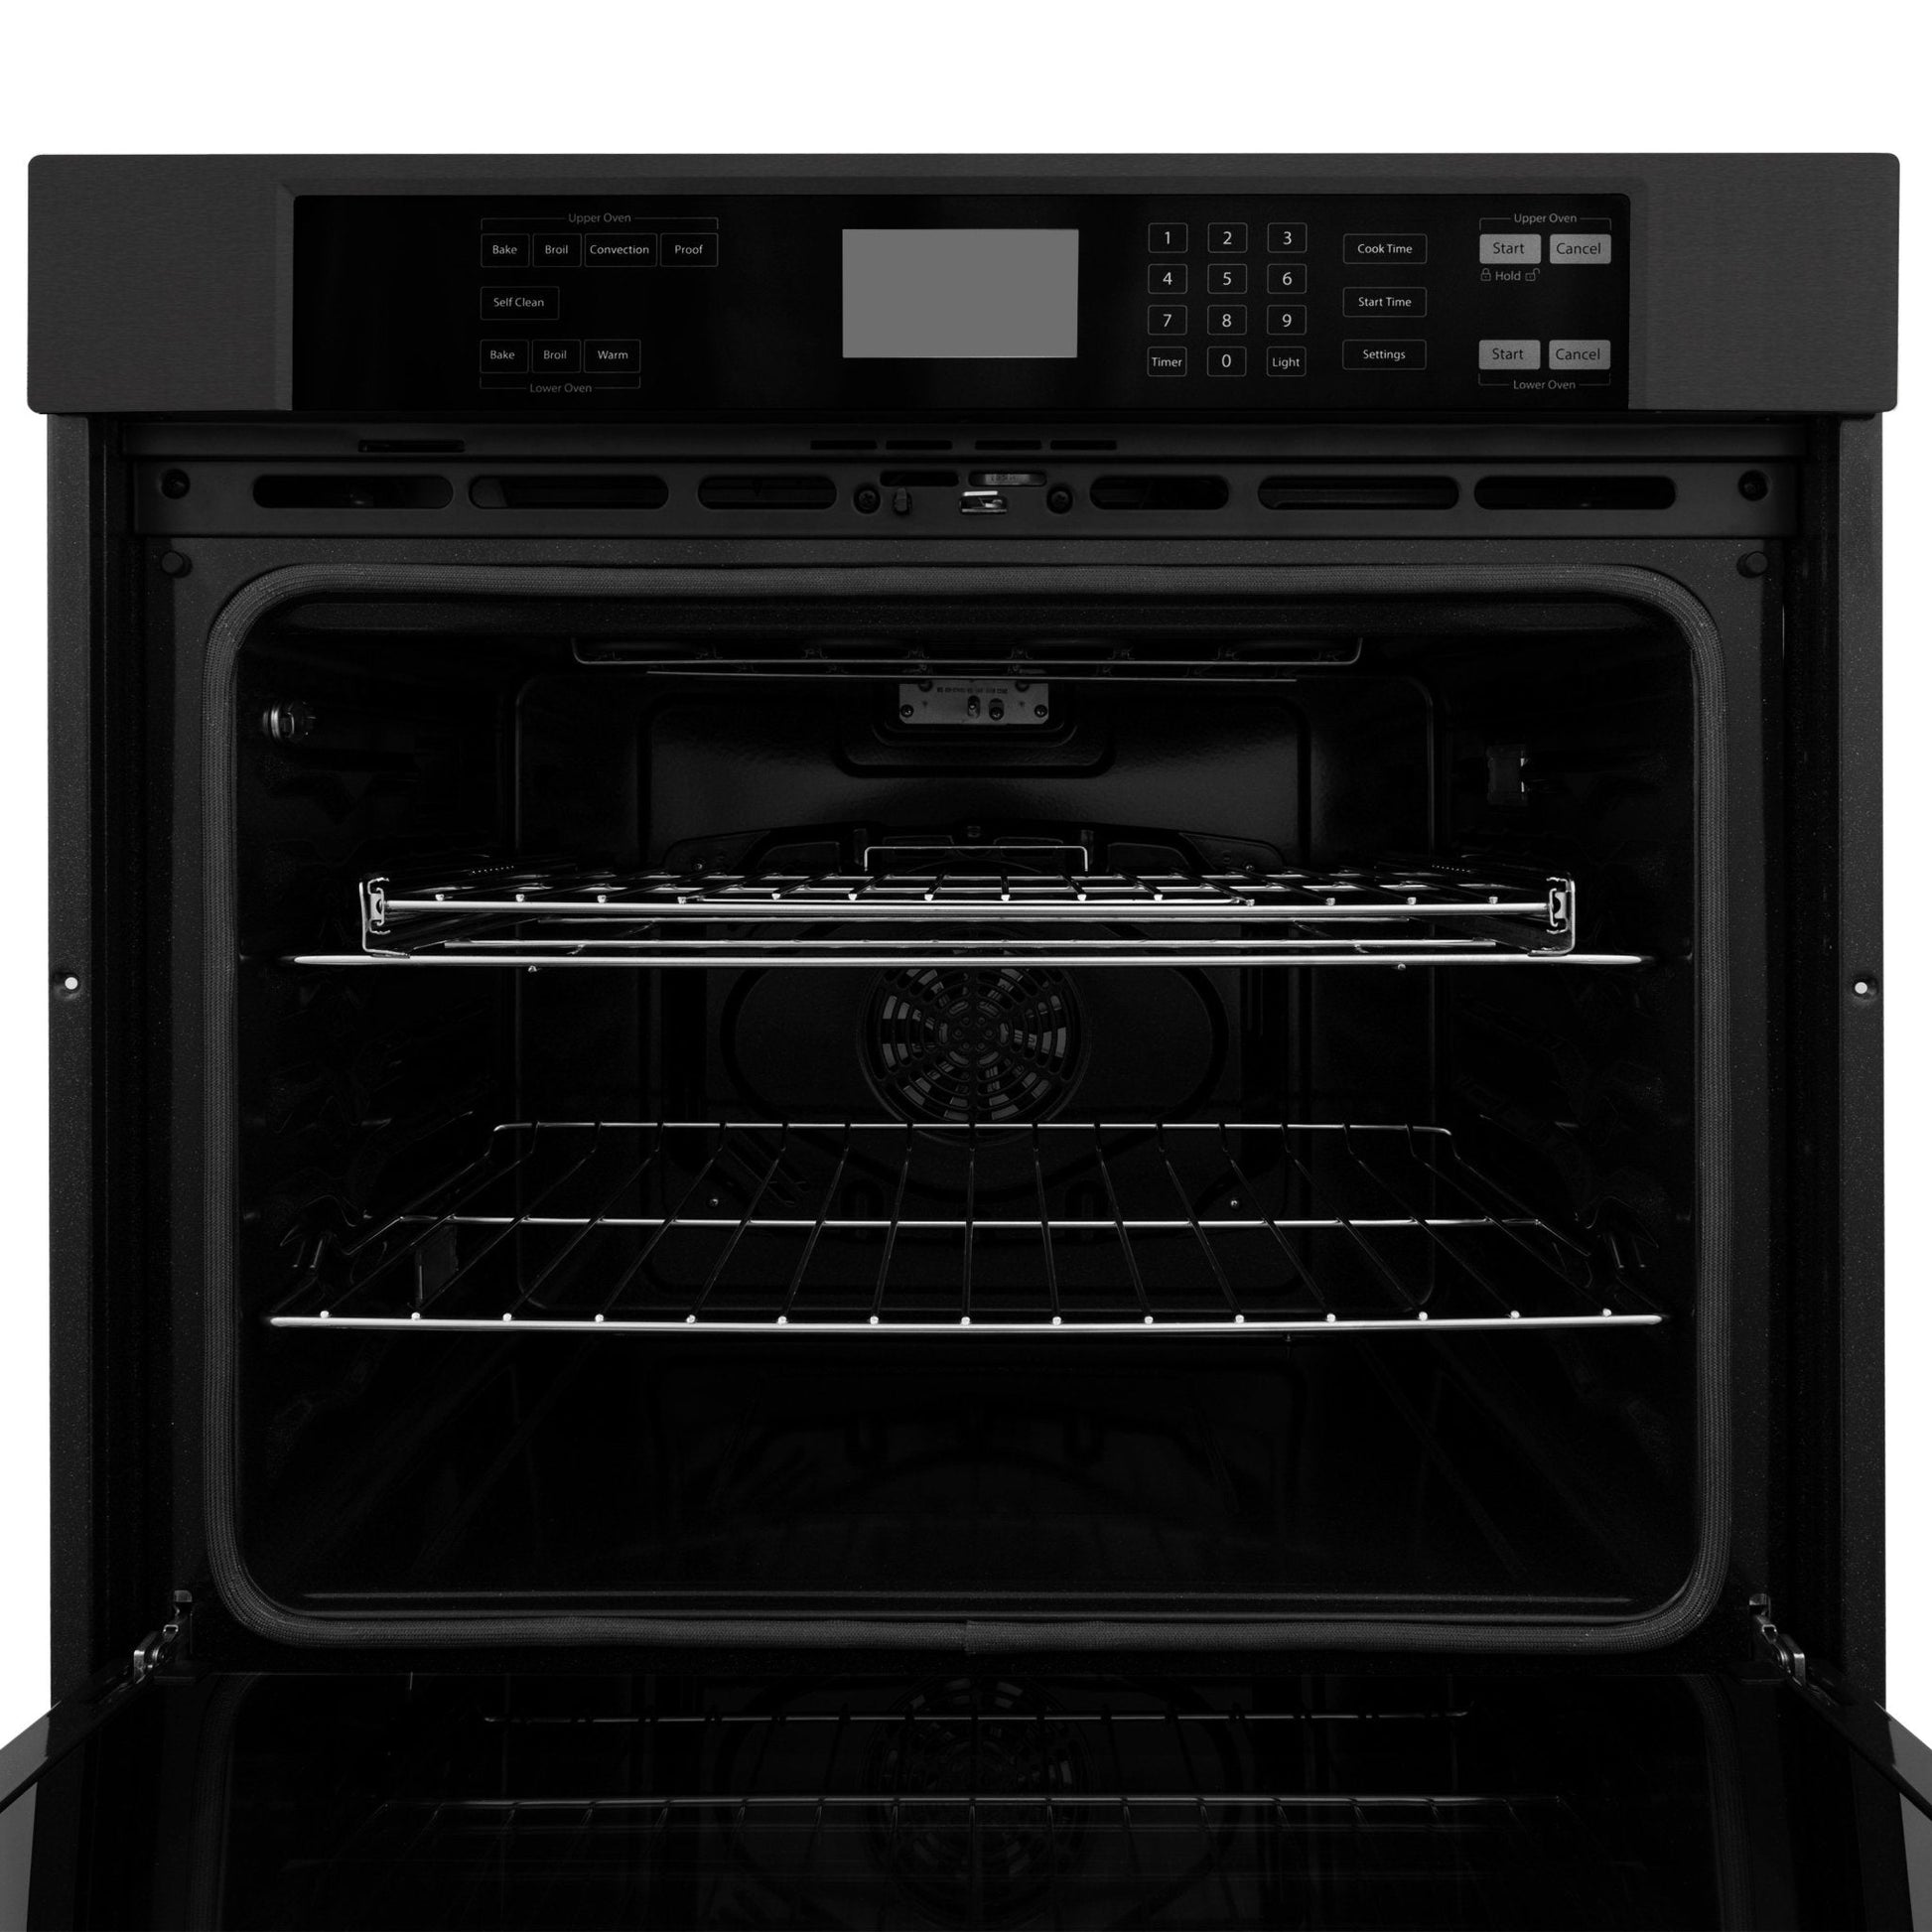 ZLINE 30" Professional Electric Double Wall Oven - Self Clean and True Convection - Stainless Steel